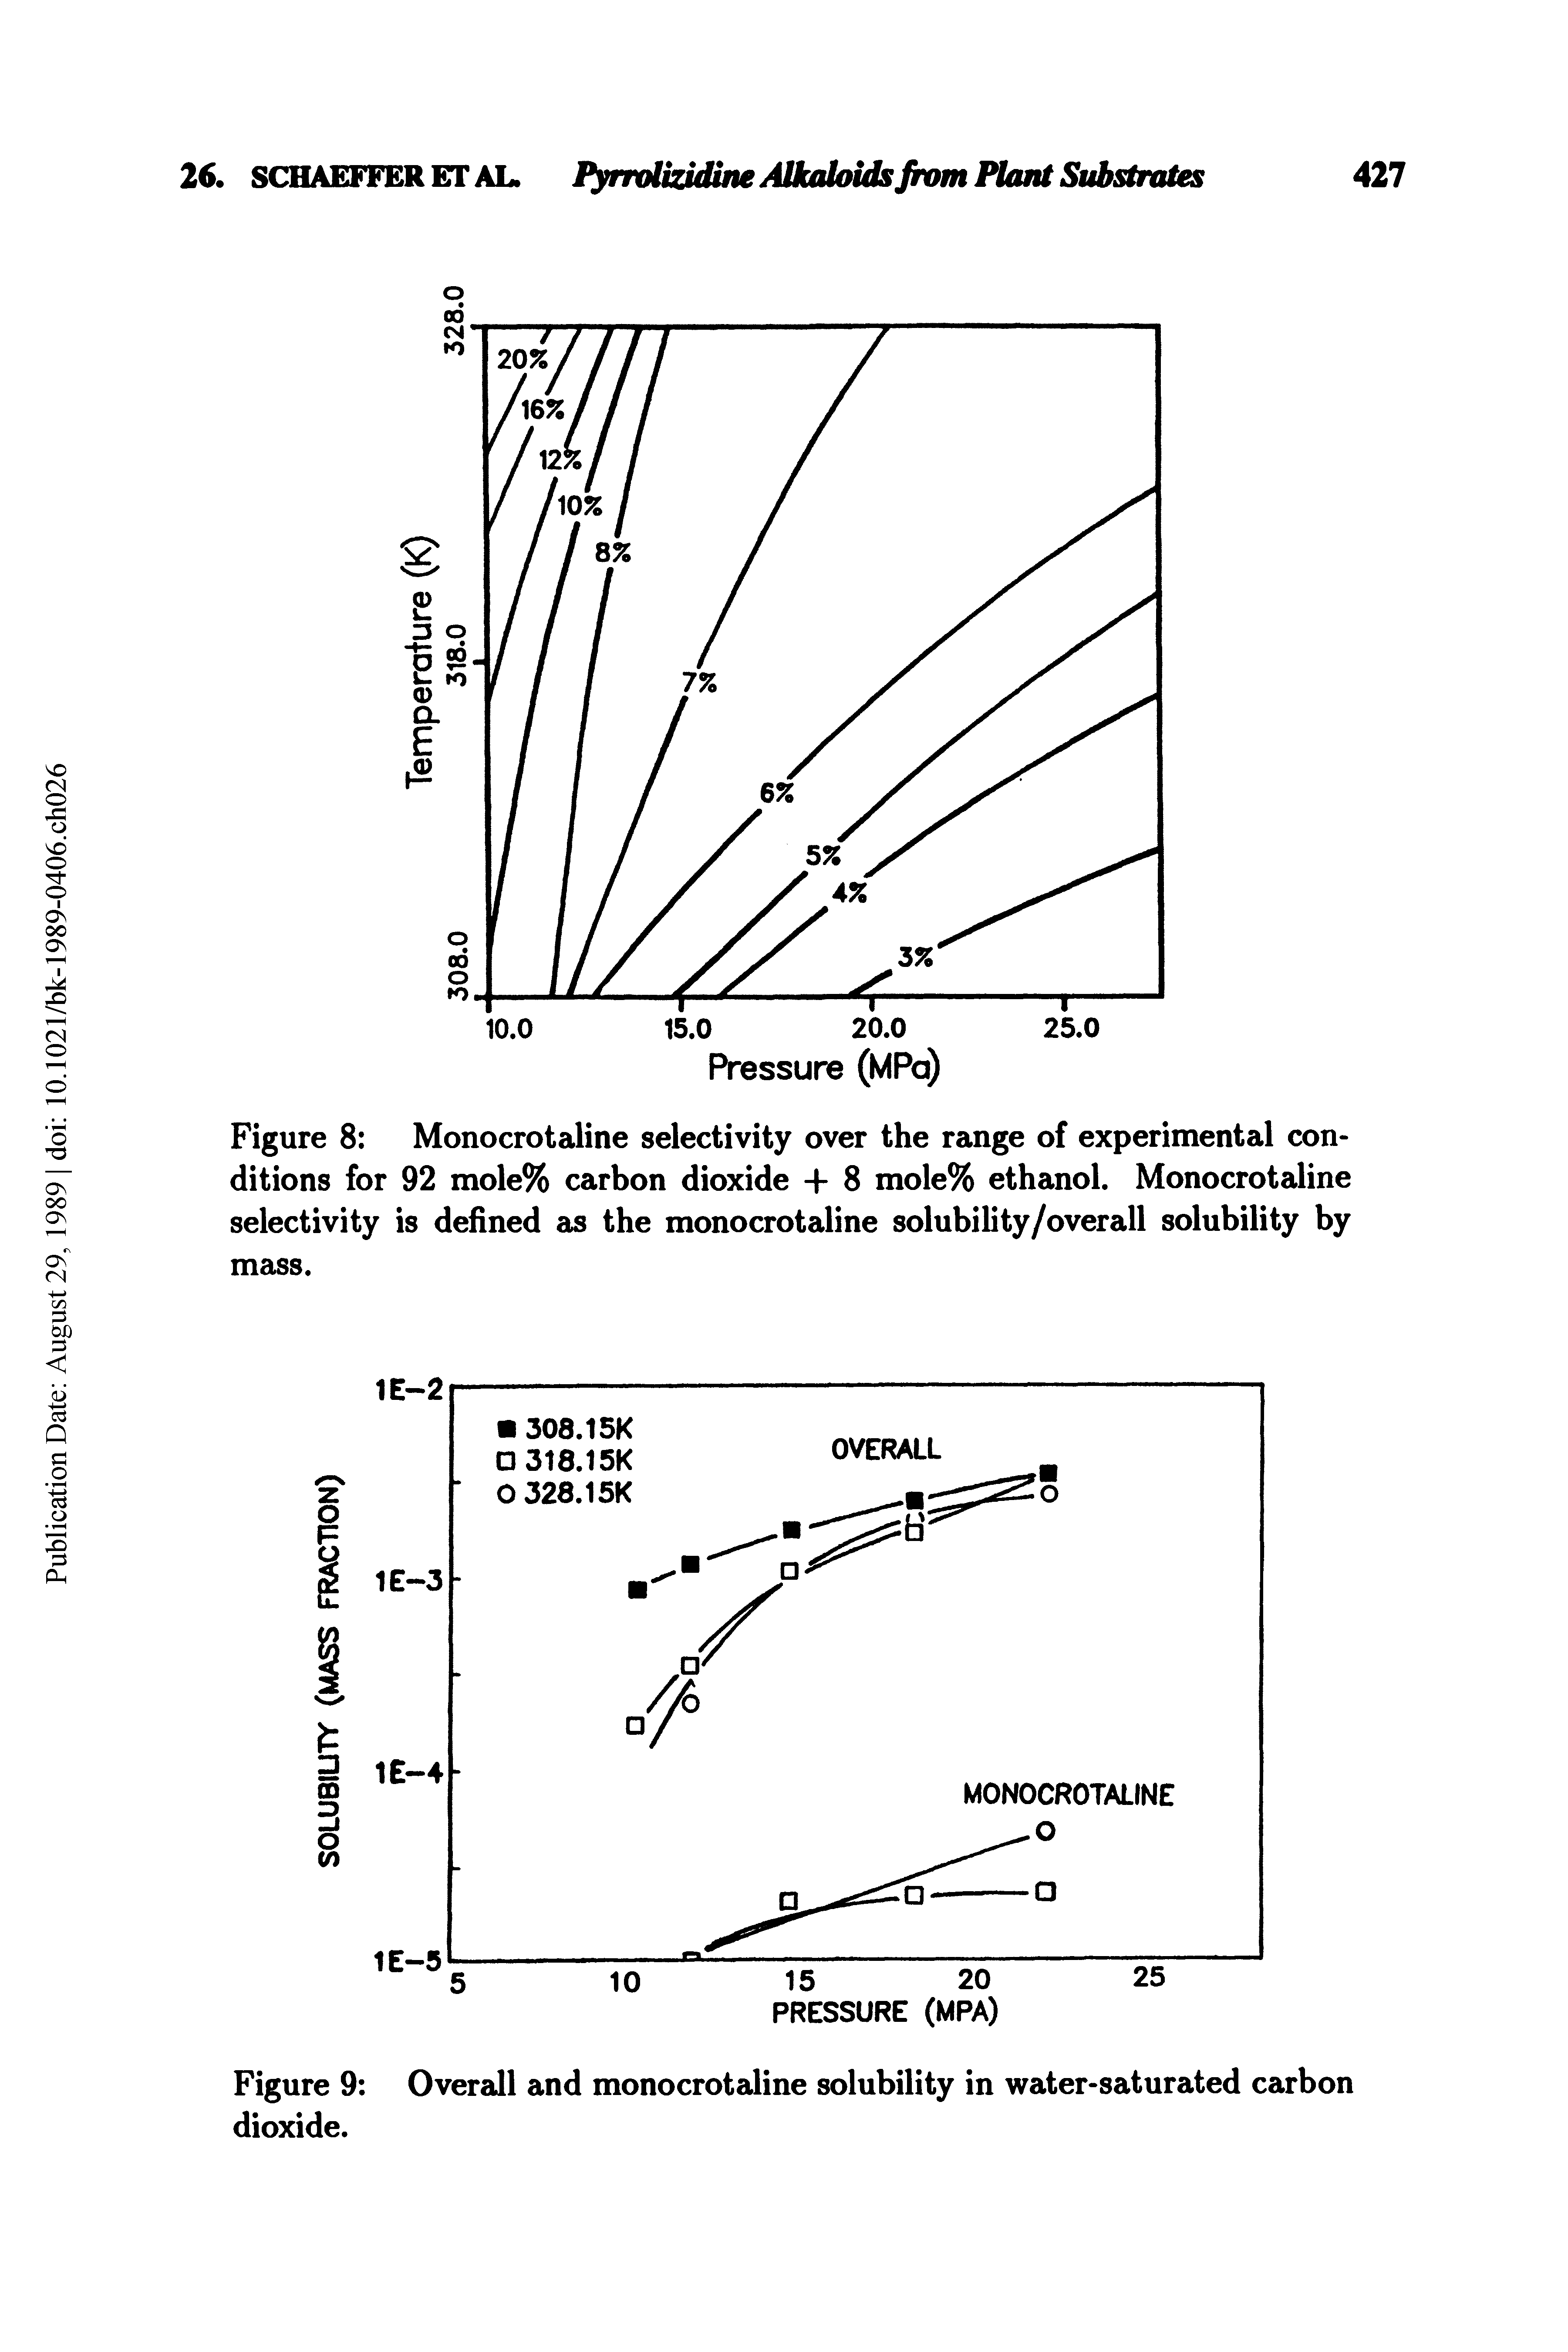 Figure 9 Overall and monocrotaline solubility in water-saturated carbon dioxide.